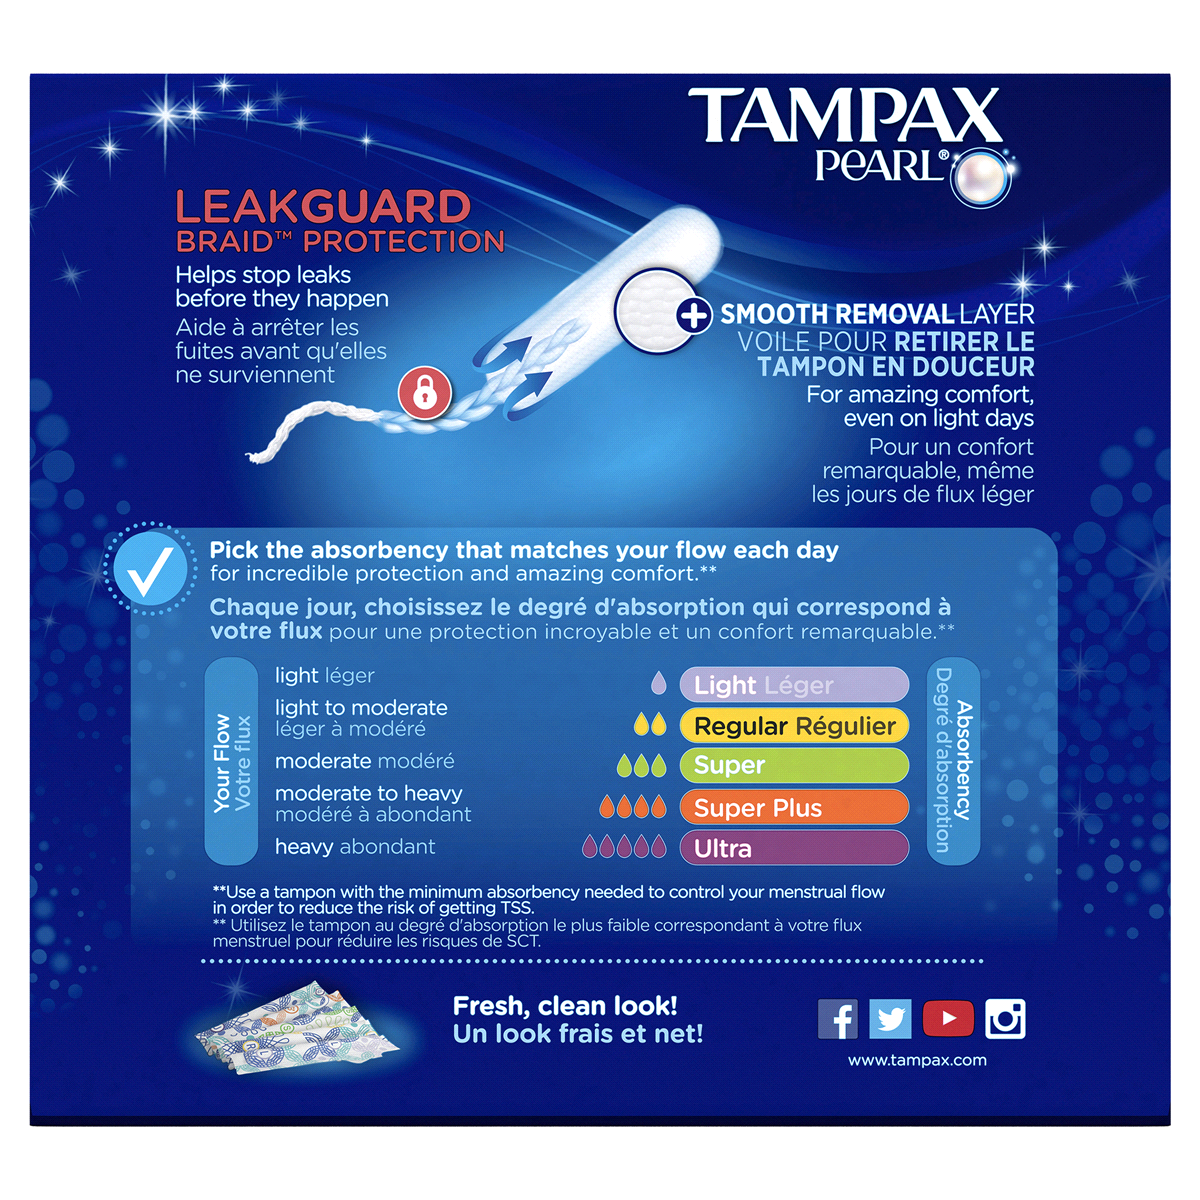 slide 4 of 8, Tampax Pearl Tampons Super Absorbency with BPA-Free Plastic Applicator and LeakGuard Braid, Unscented, 36 Count, 36 ct